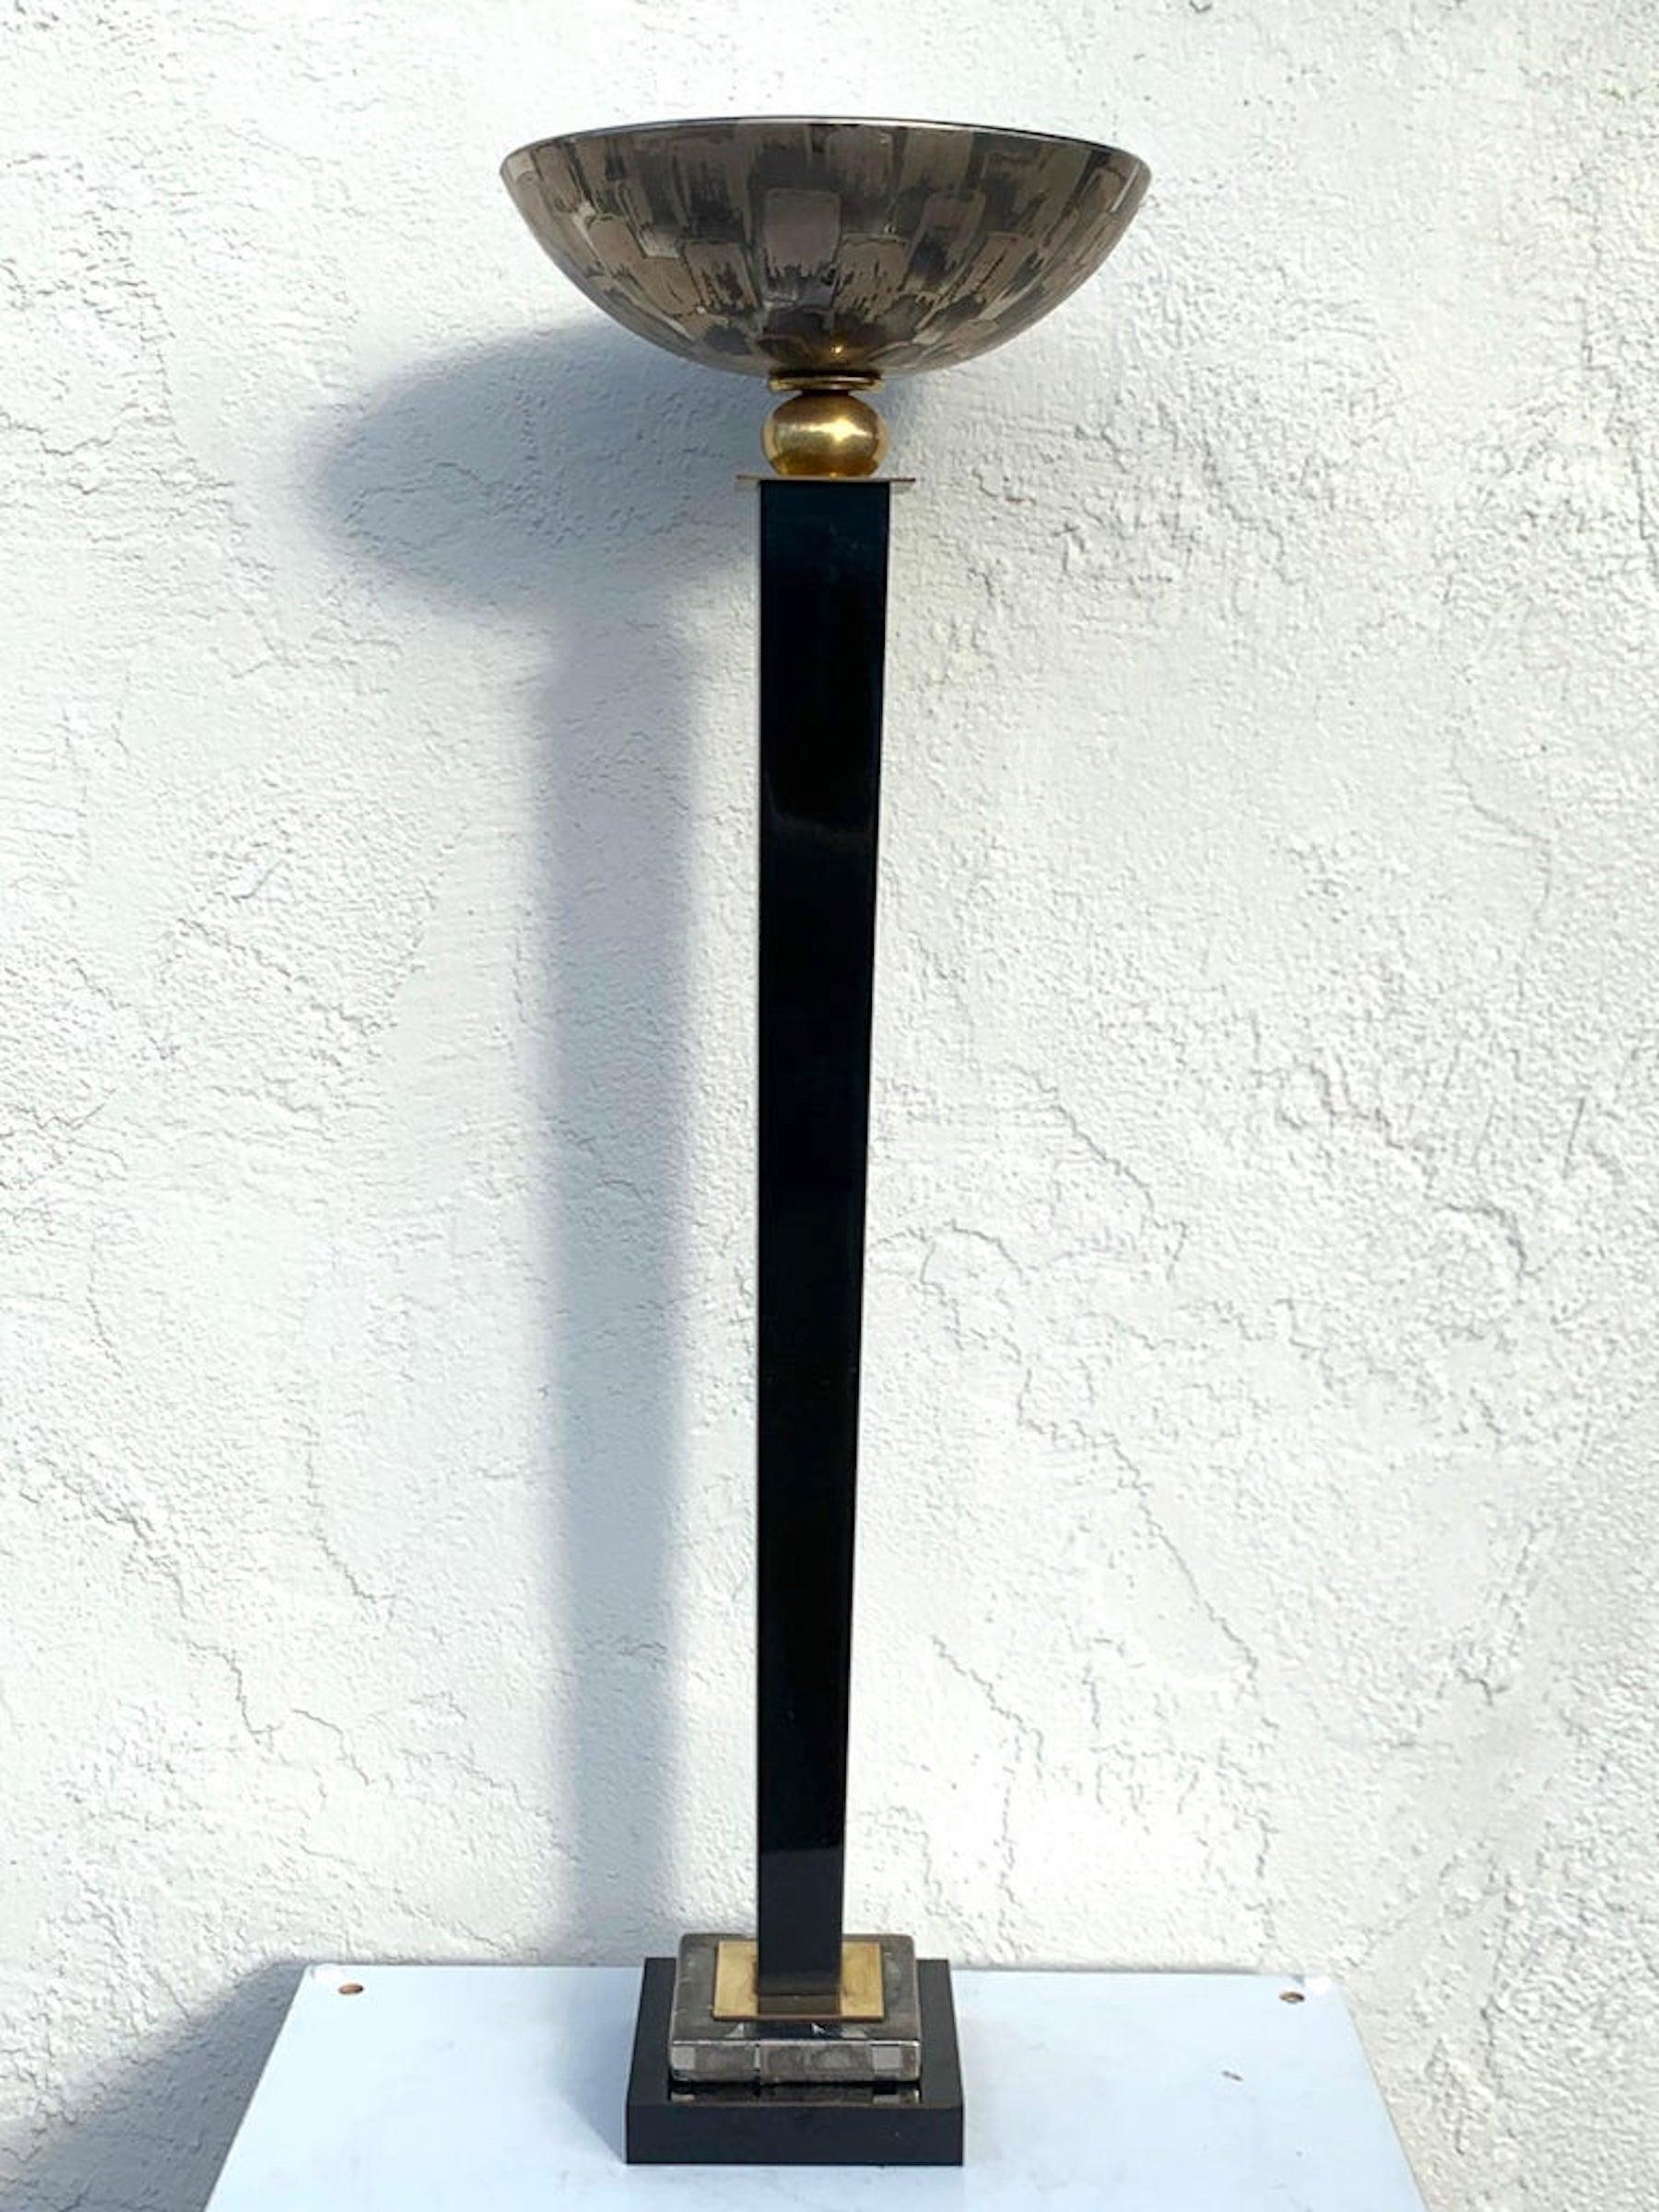 A single midcentury table torchiere lamp, attributed to Mangani, with a 11.5